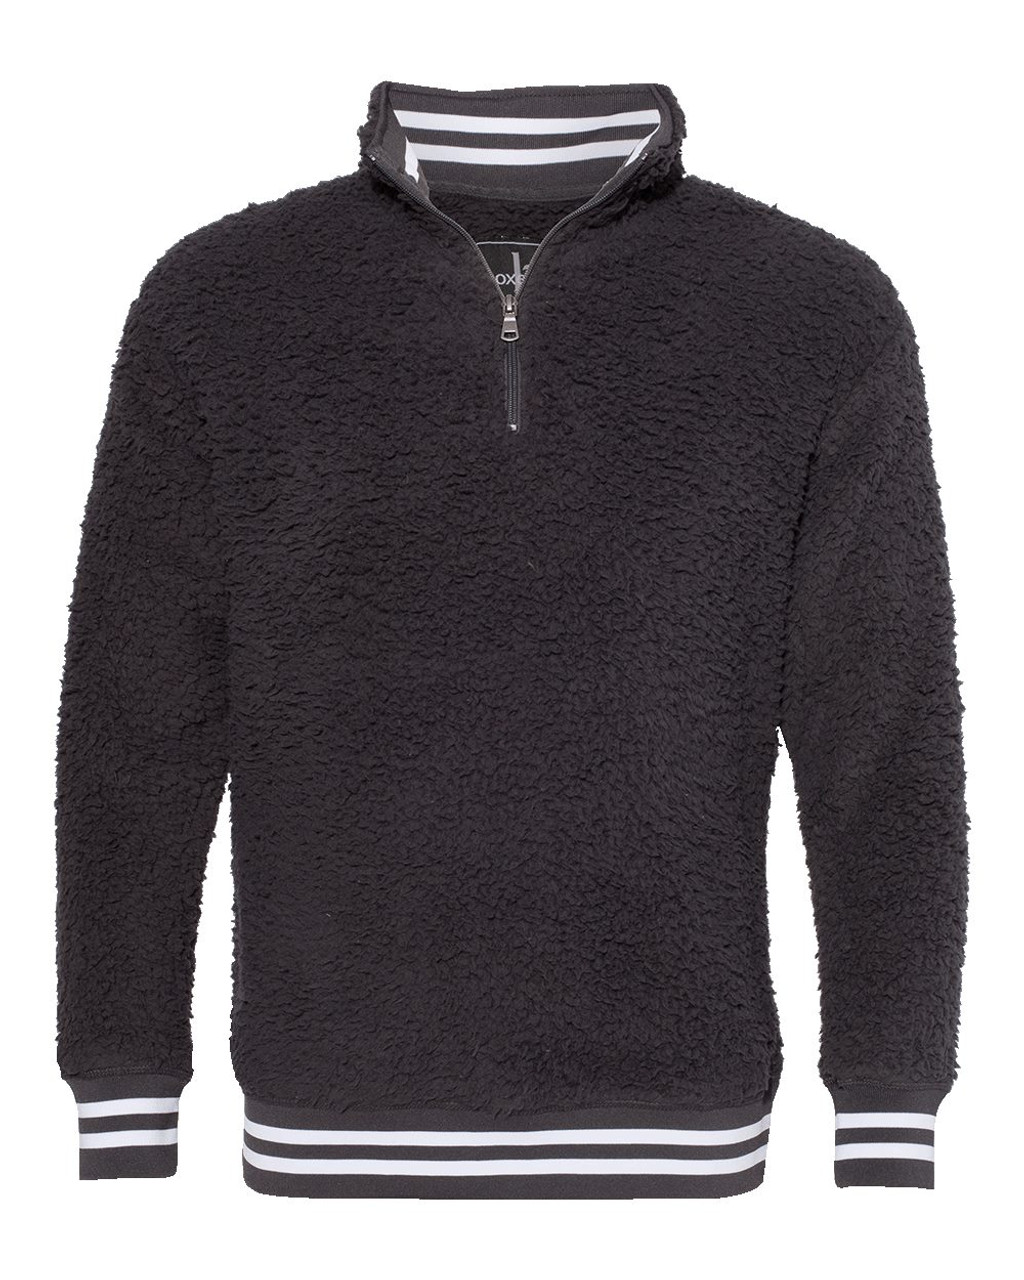 Embroidered Varsity Sherpa Quarter-Zip Pullover - Q20